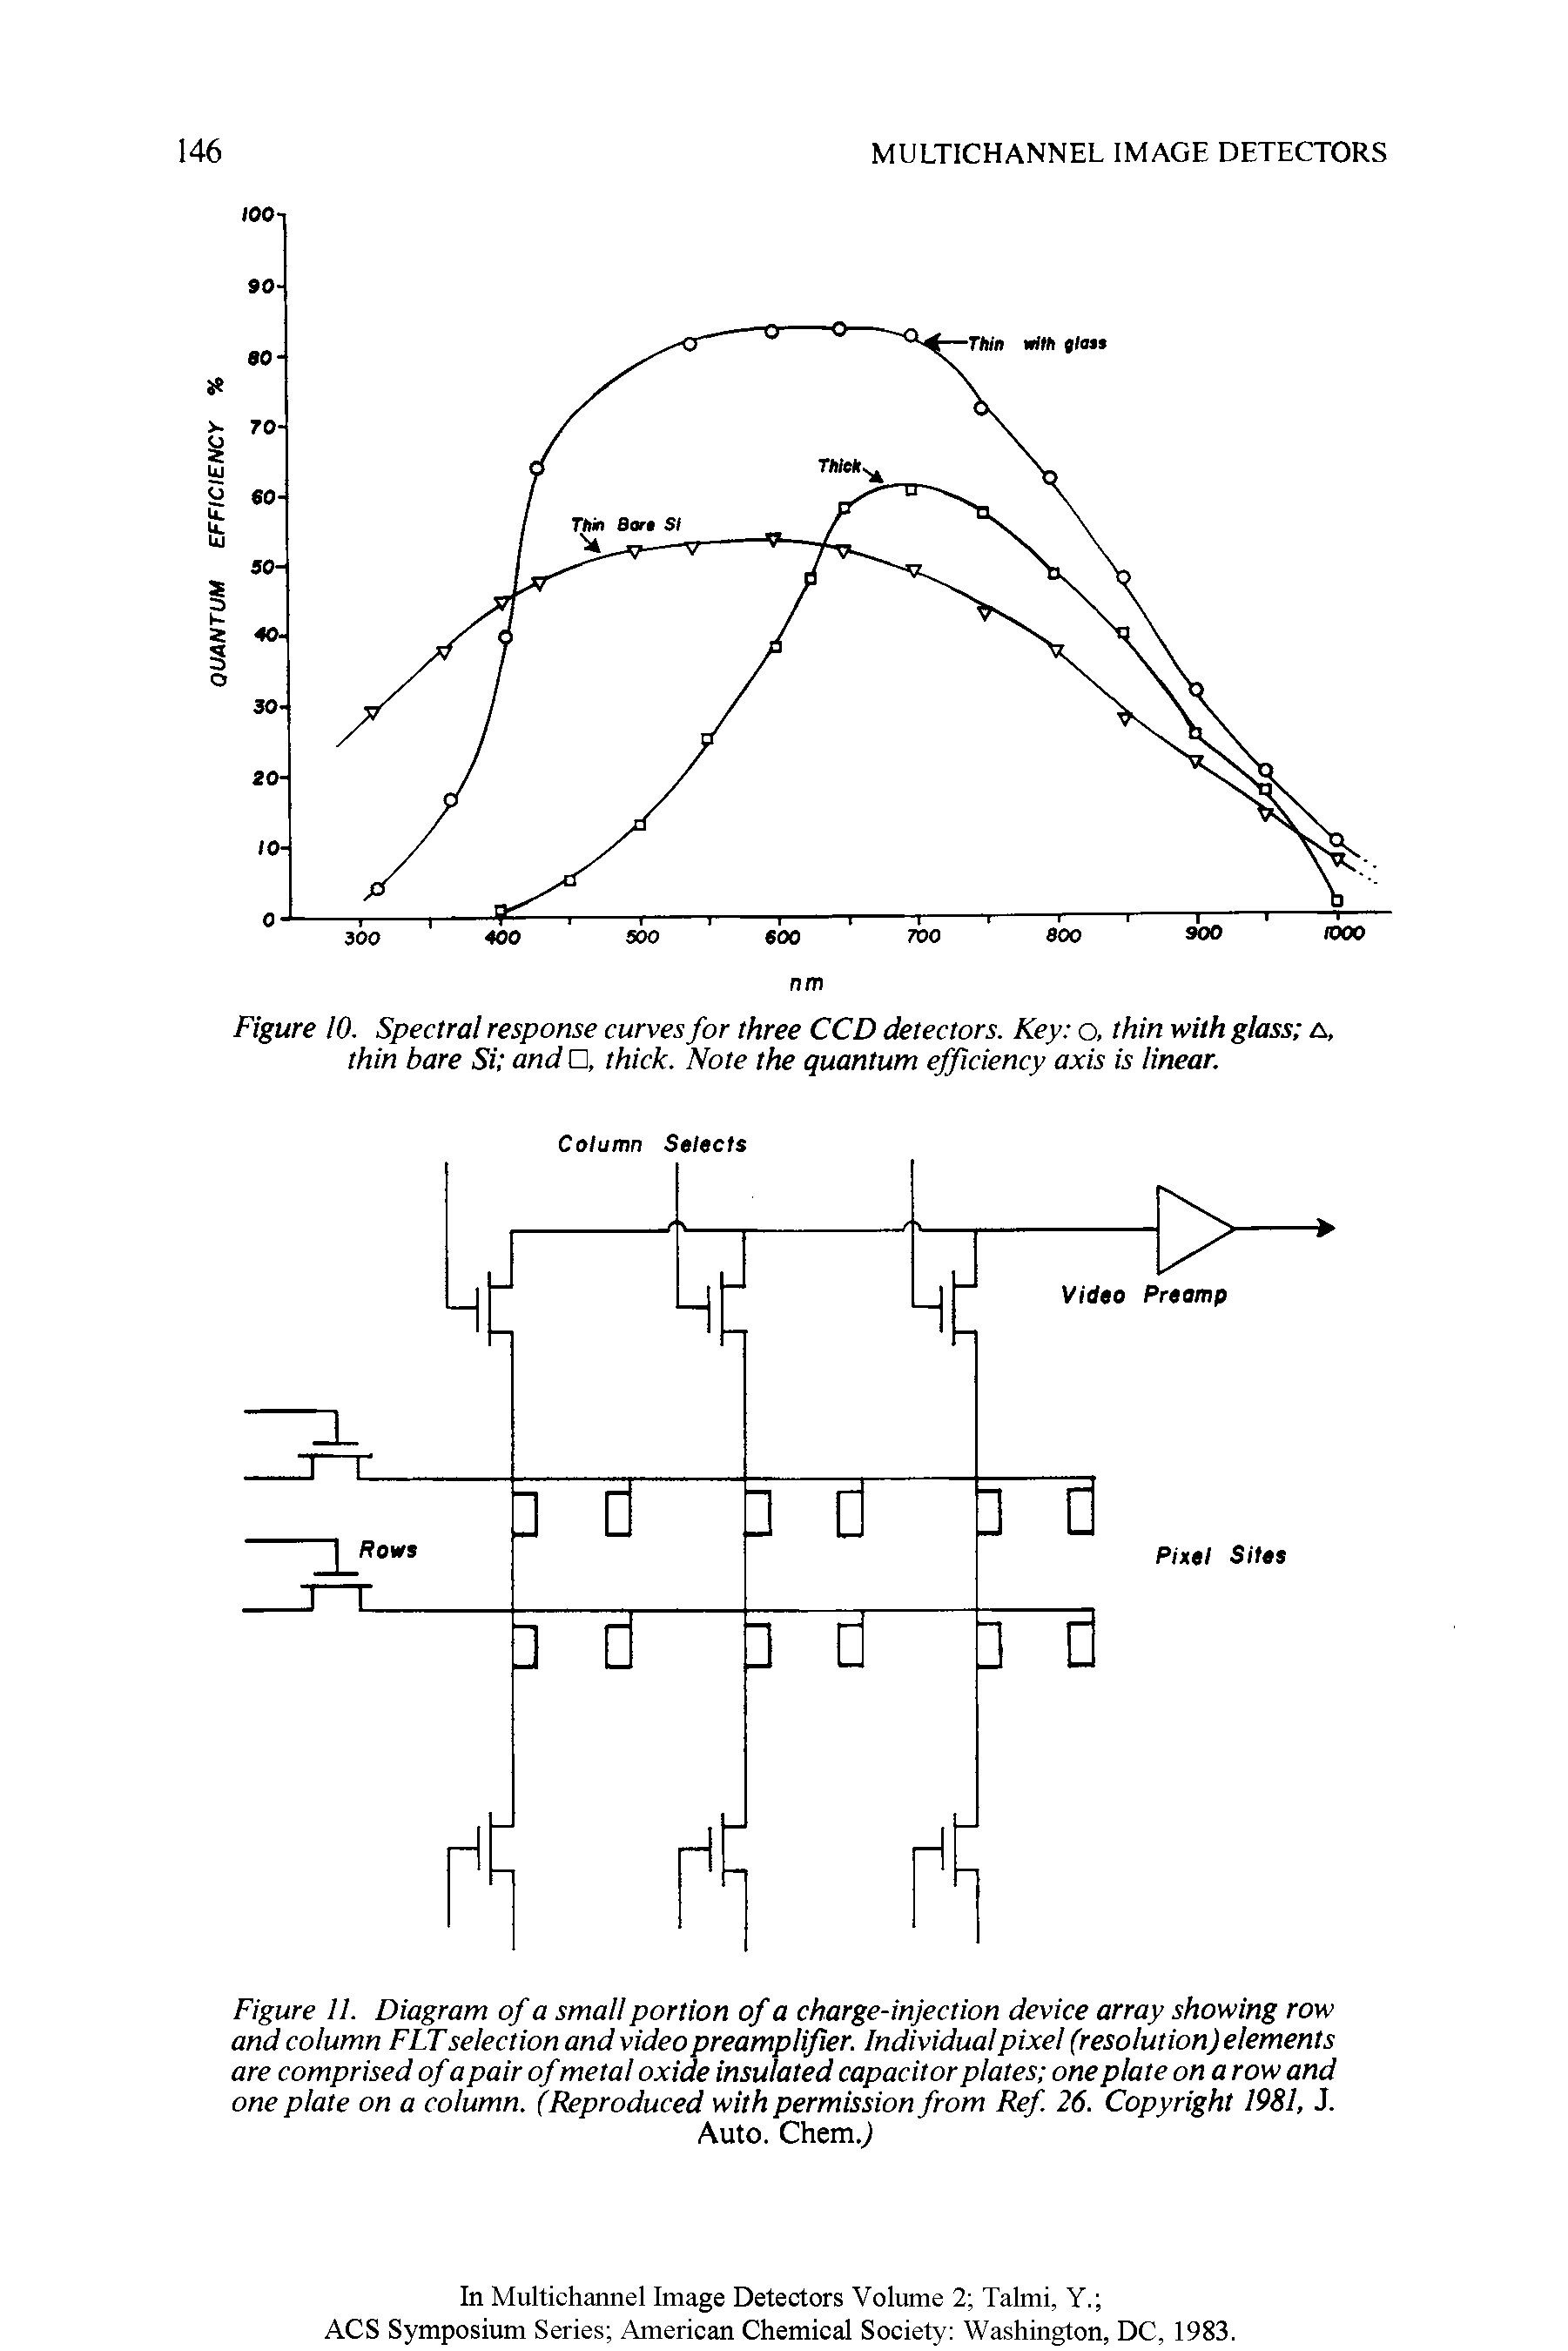 Figure II. Diagram of a small portion of a charge-injection device array showing row and column FLT selection and video preamplifier. Individual pixel (resolution) elements are comprised of a pair ofmetal oxide insulated capacitor plates one plate on a row and one plate on a column. (Reproduced with permission from Ref. 26. Copyright 1981, J.